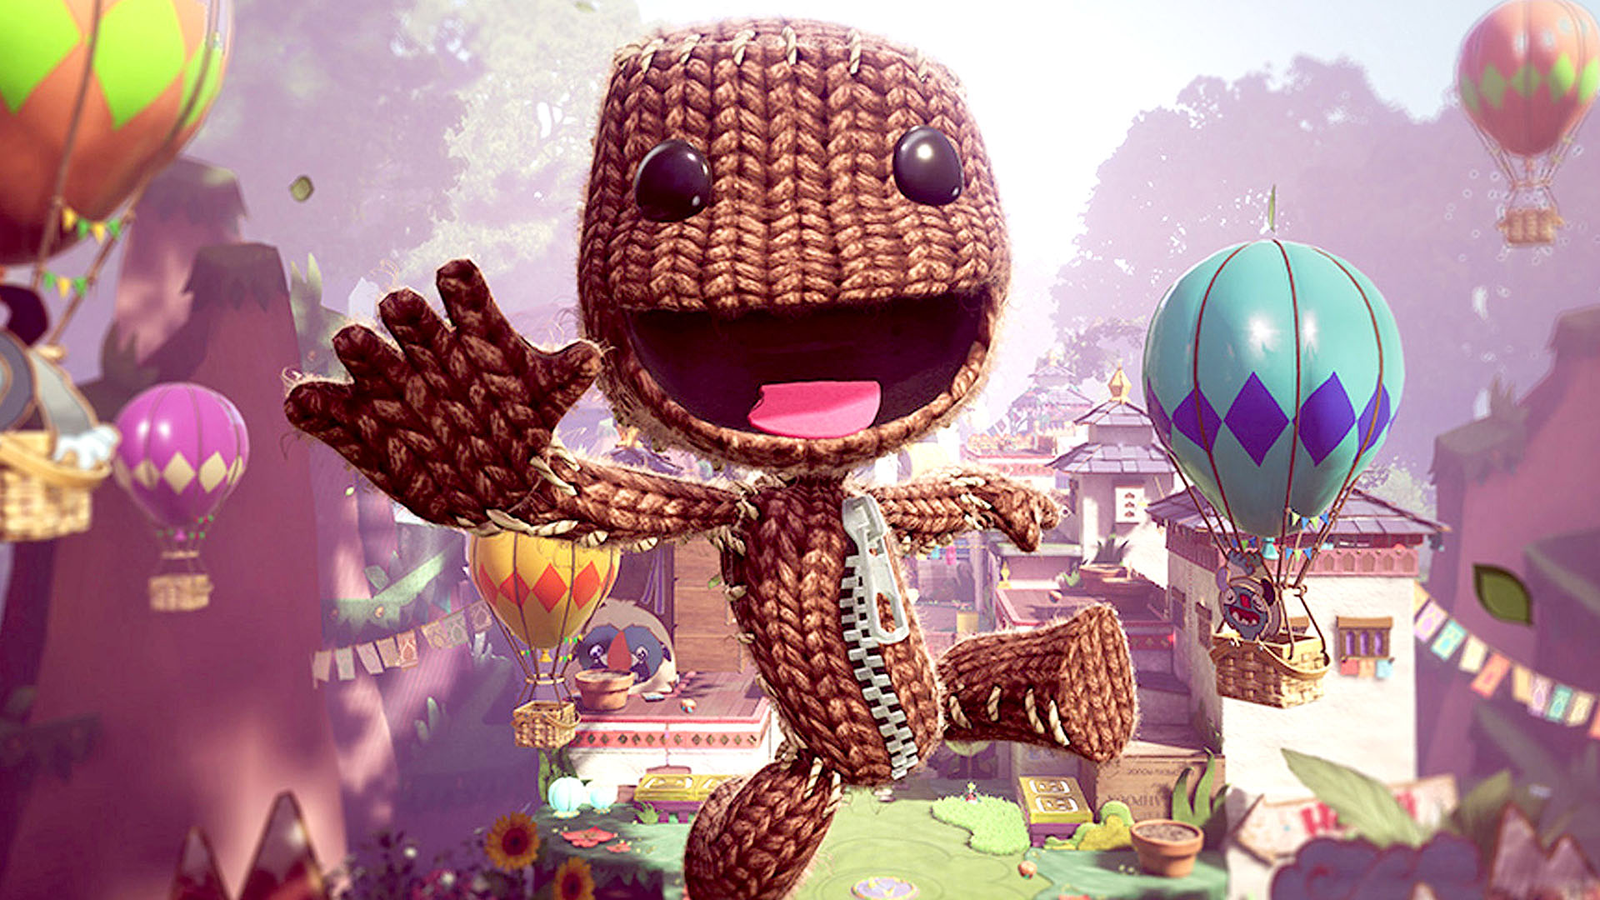 PlayStation Plus Monthly Games for April: Meet Your Maker, Sackboy